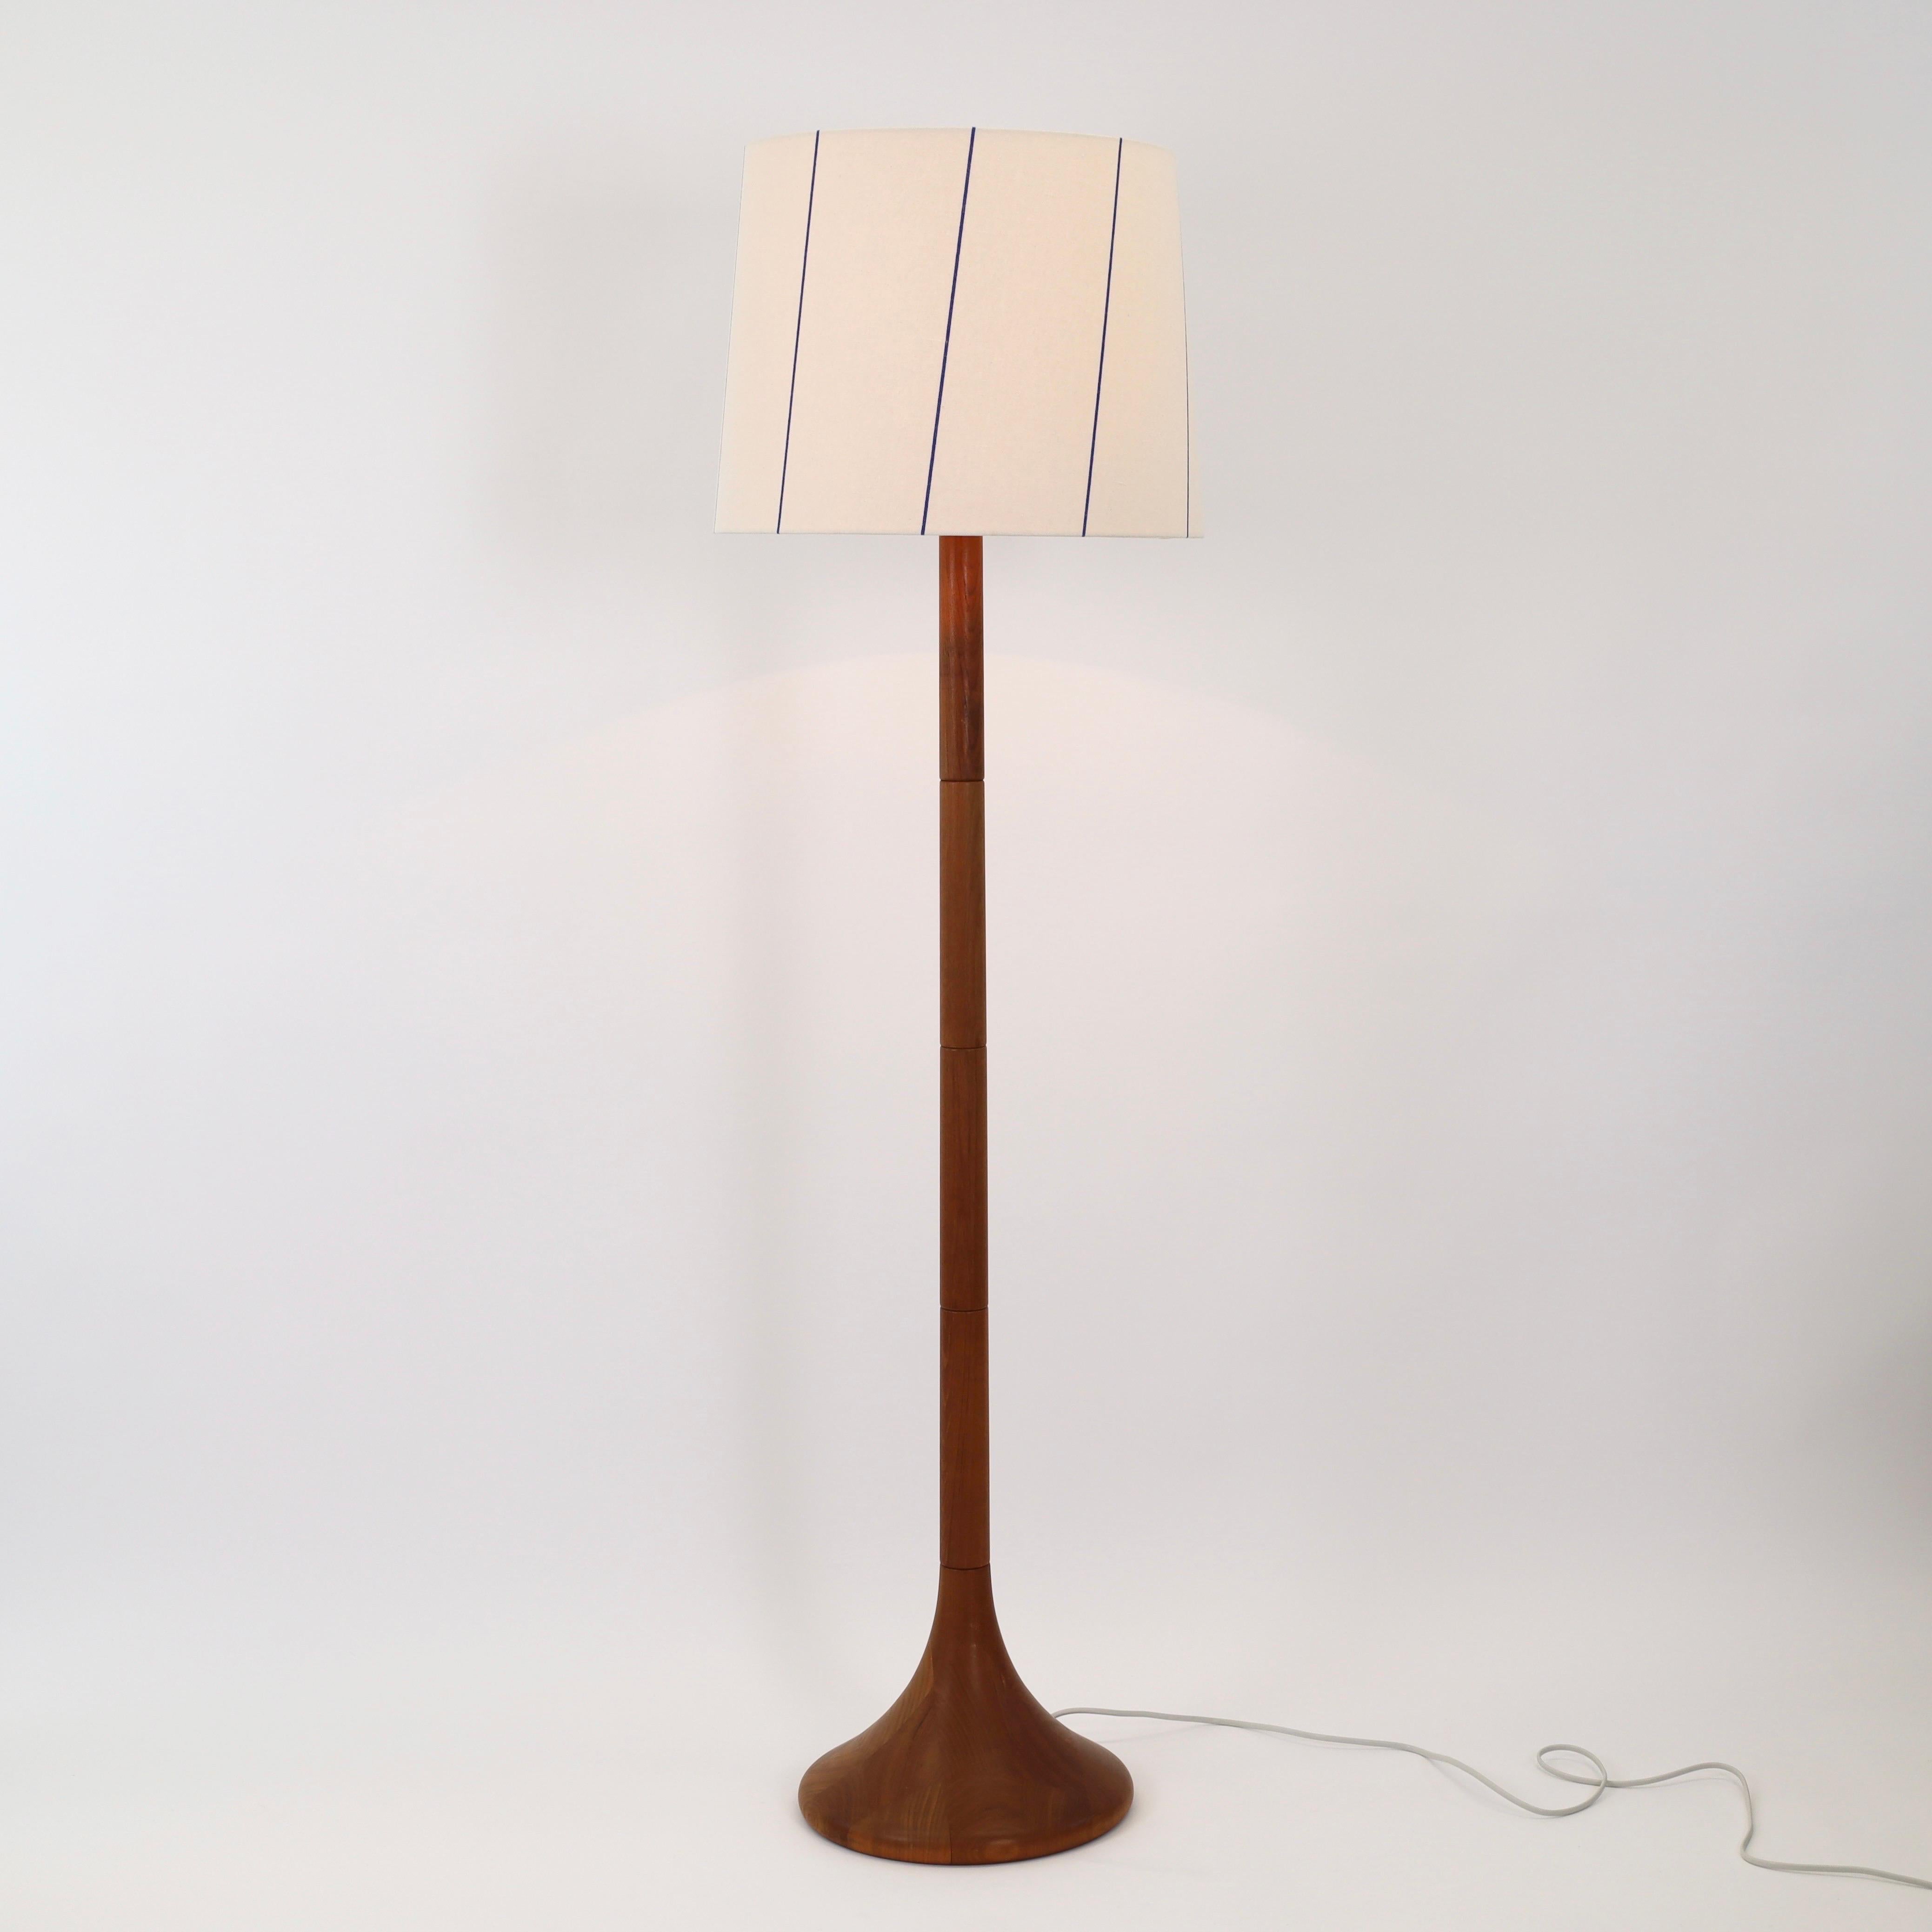 1970s Danish teak wood floor lamp in great condition accomplished a white fabric shade with blue stribes. A substantial floor lamp for a beautiful space.
 
* A teak wood floor lamp with a white fabric shade with blue stribes 
* Manufacturer: unknown